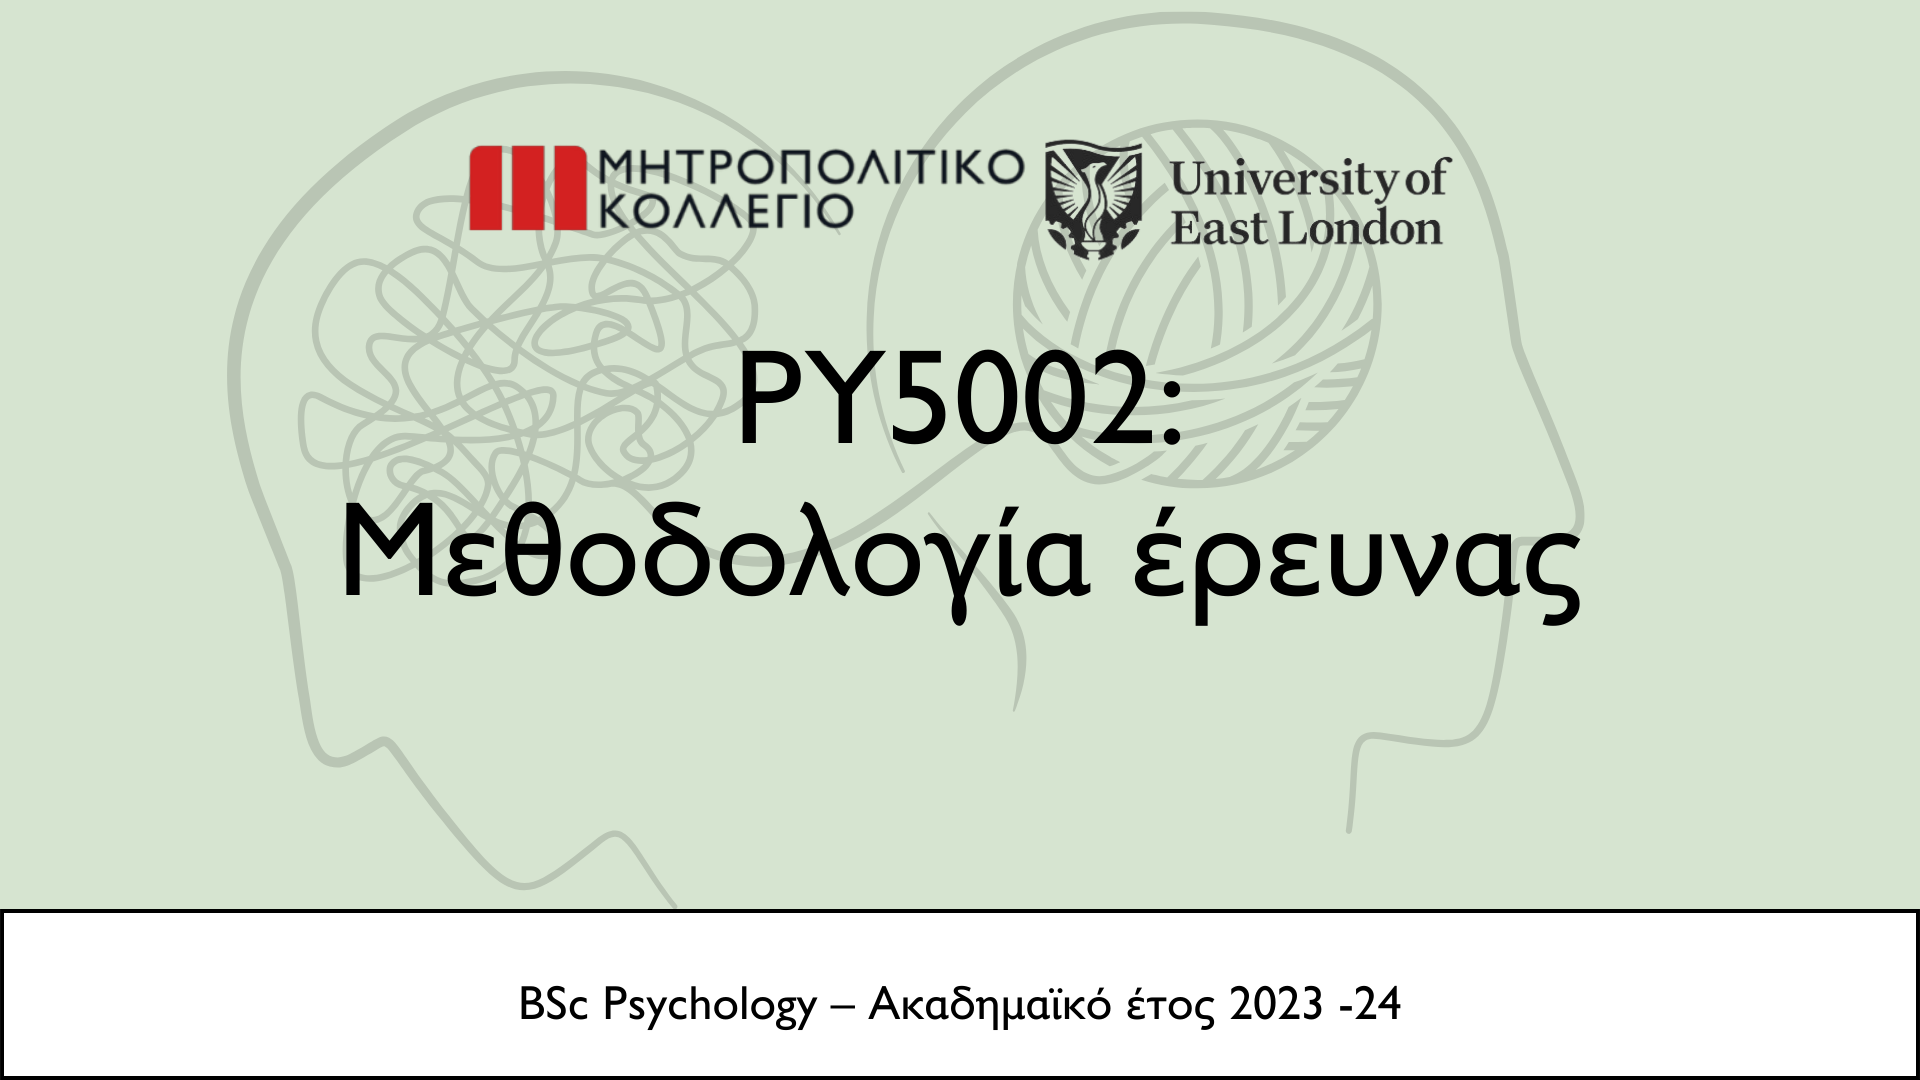 PSYCHOLOGICAL RESEARCH METHODS (PY5002_1)